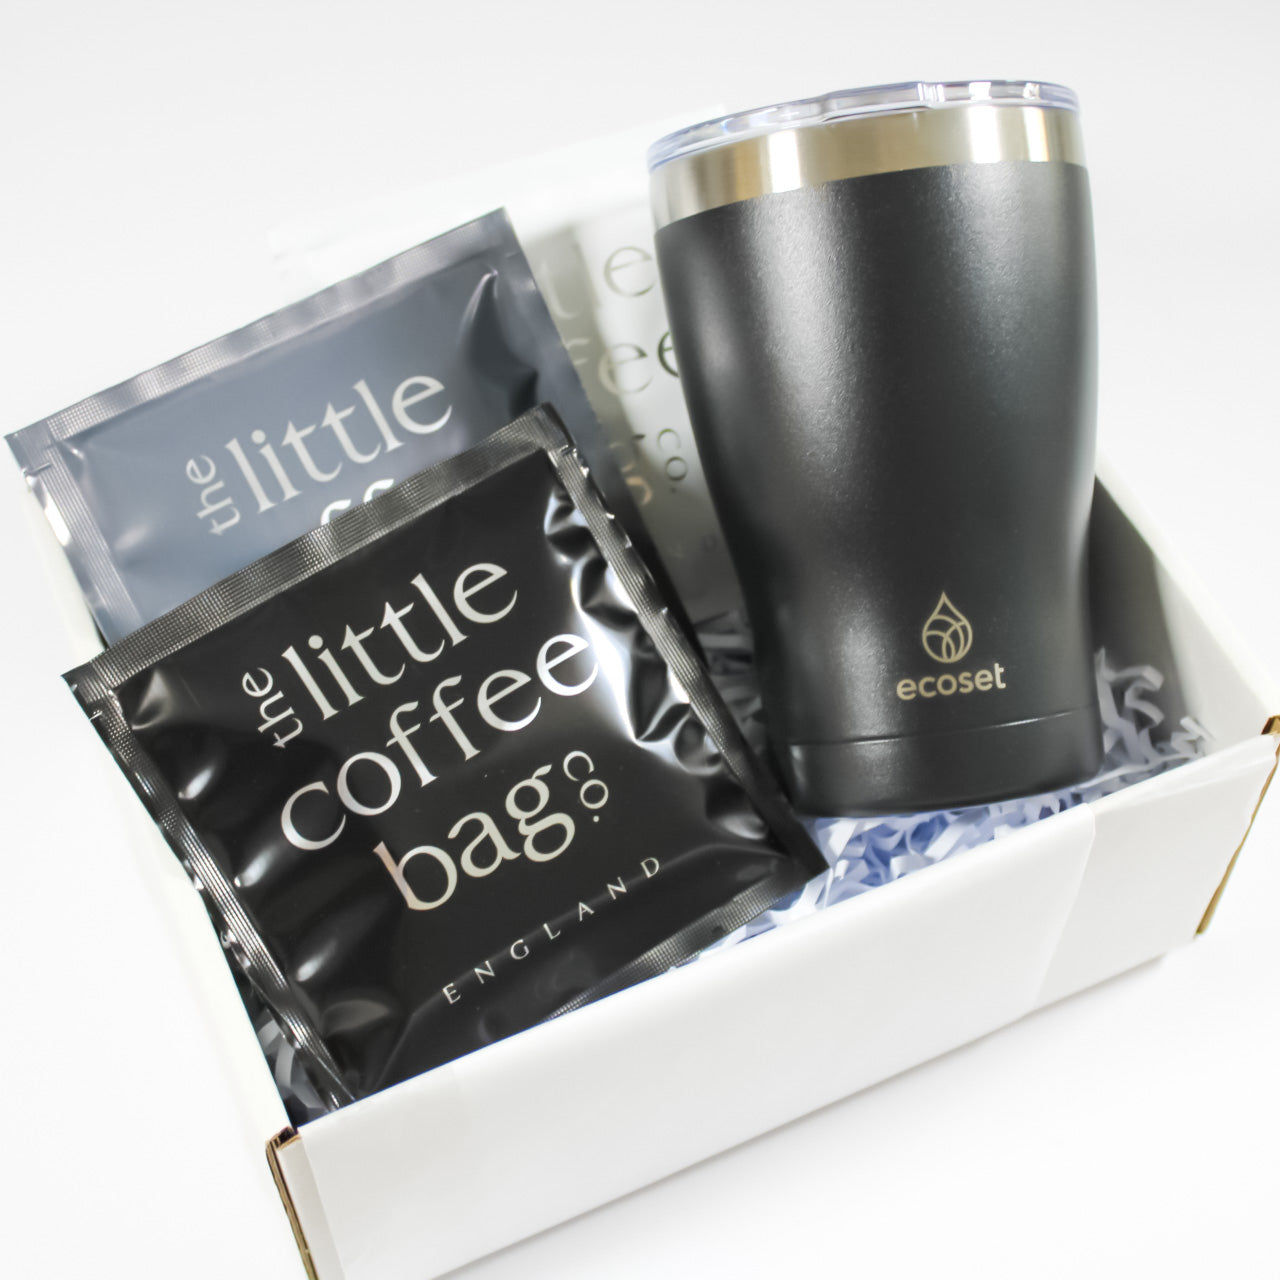 Travel Mug Gift Box l Corporate Gifts Ireland l Gifts For Men